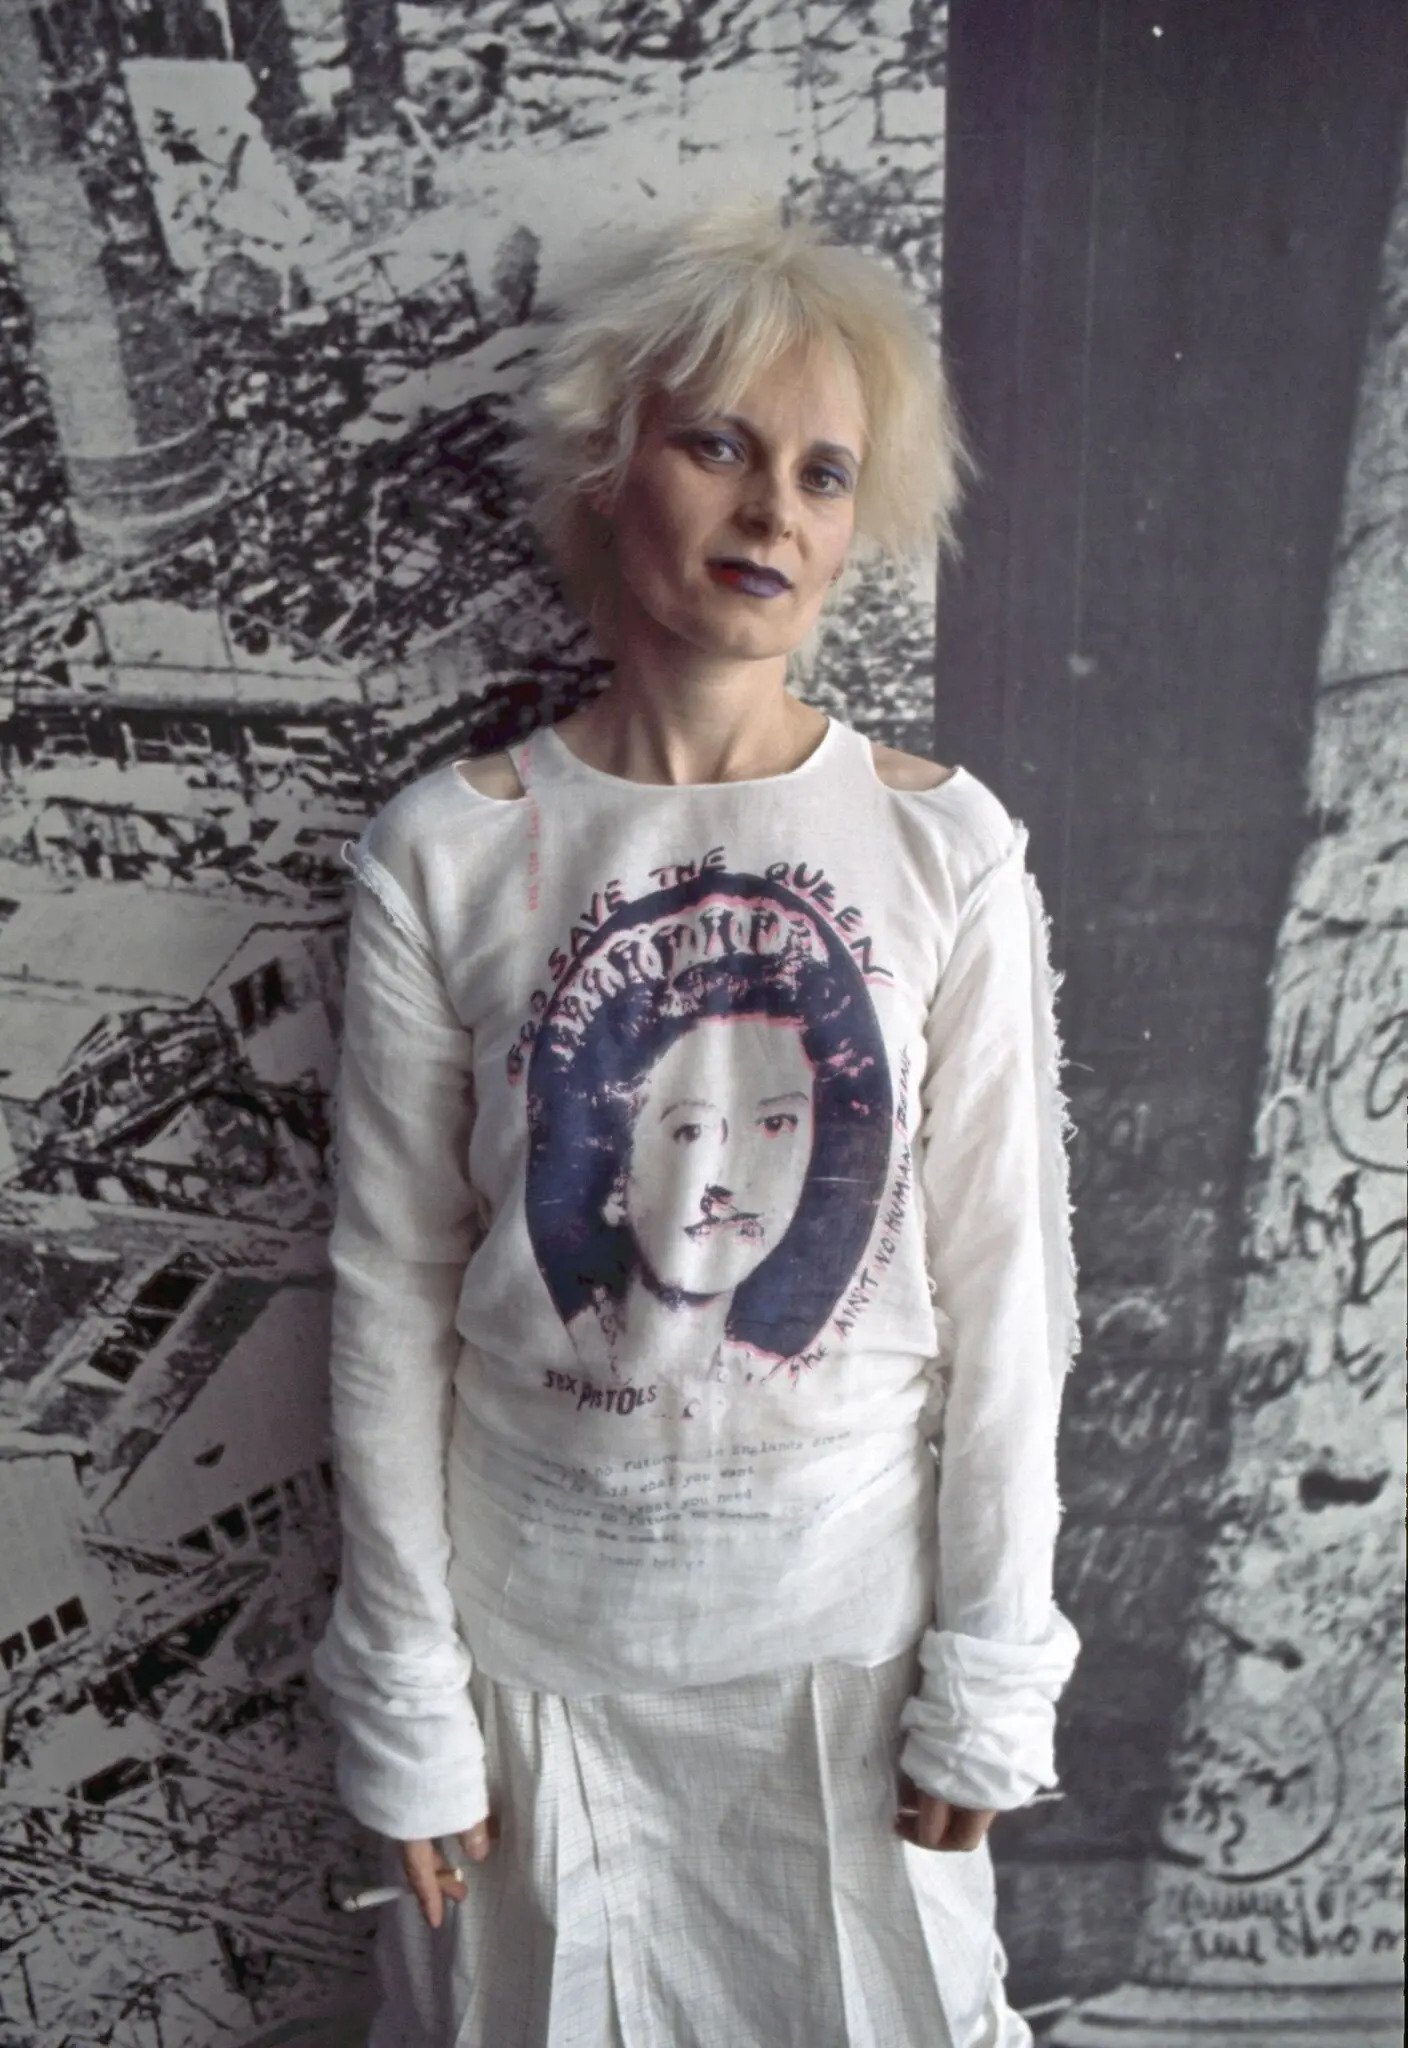 Vivienne Westwood, 81, Dies; Brought Provocative Punk Style to High Fashion